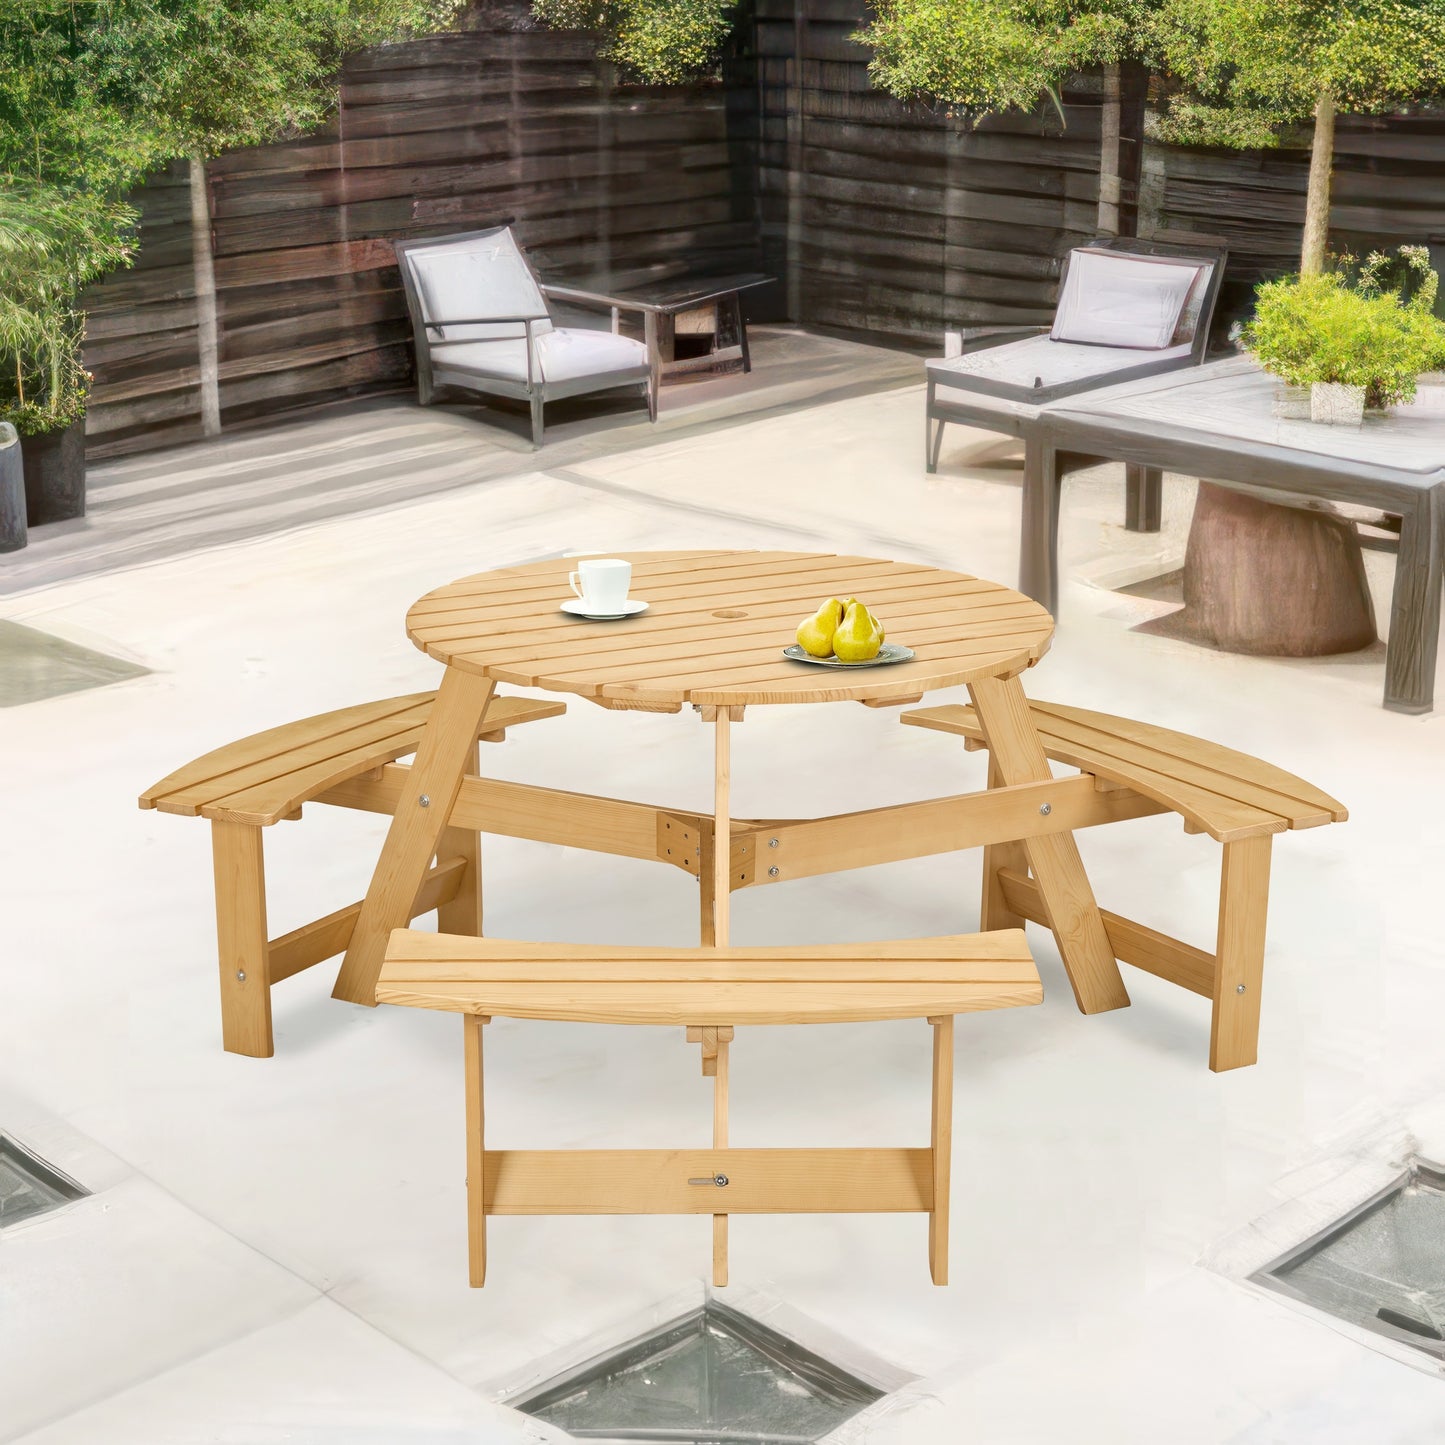 Outdoor 6 Person Picnic Table